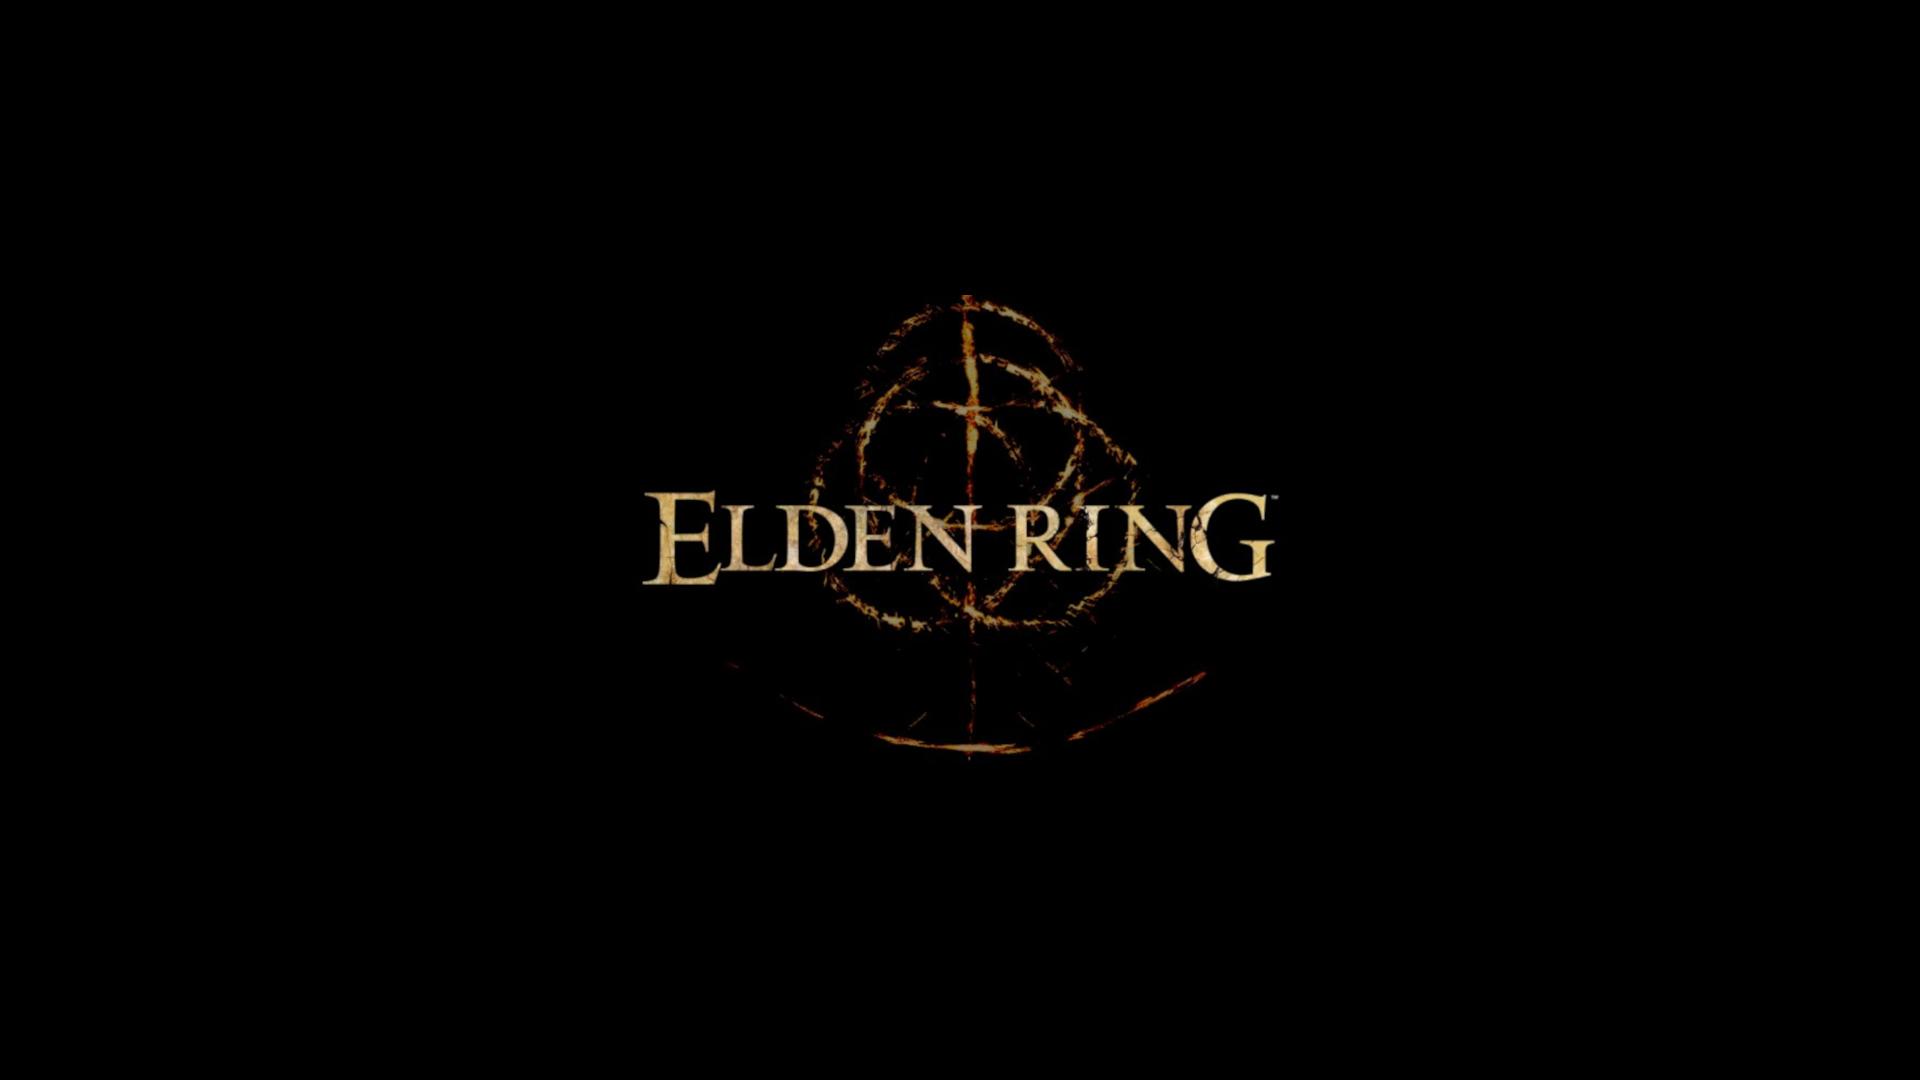 E3 Microsoft] Elden Ring announced, new IP from From Software